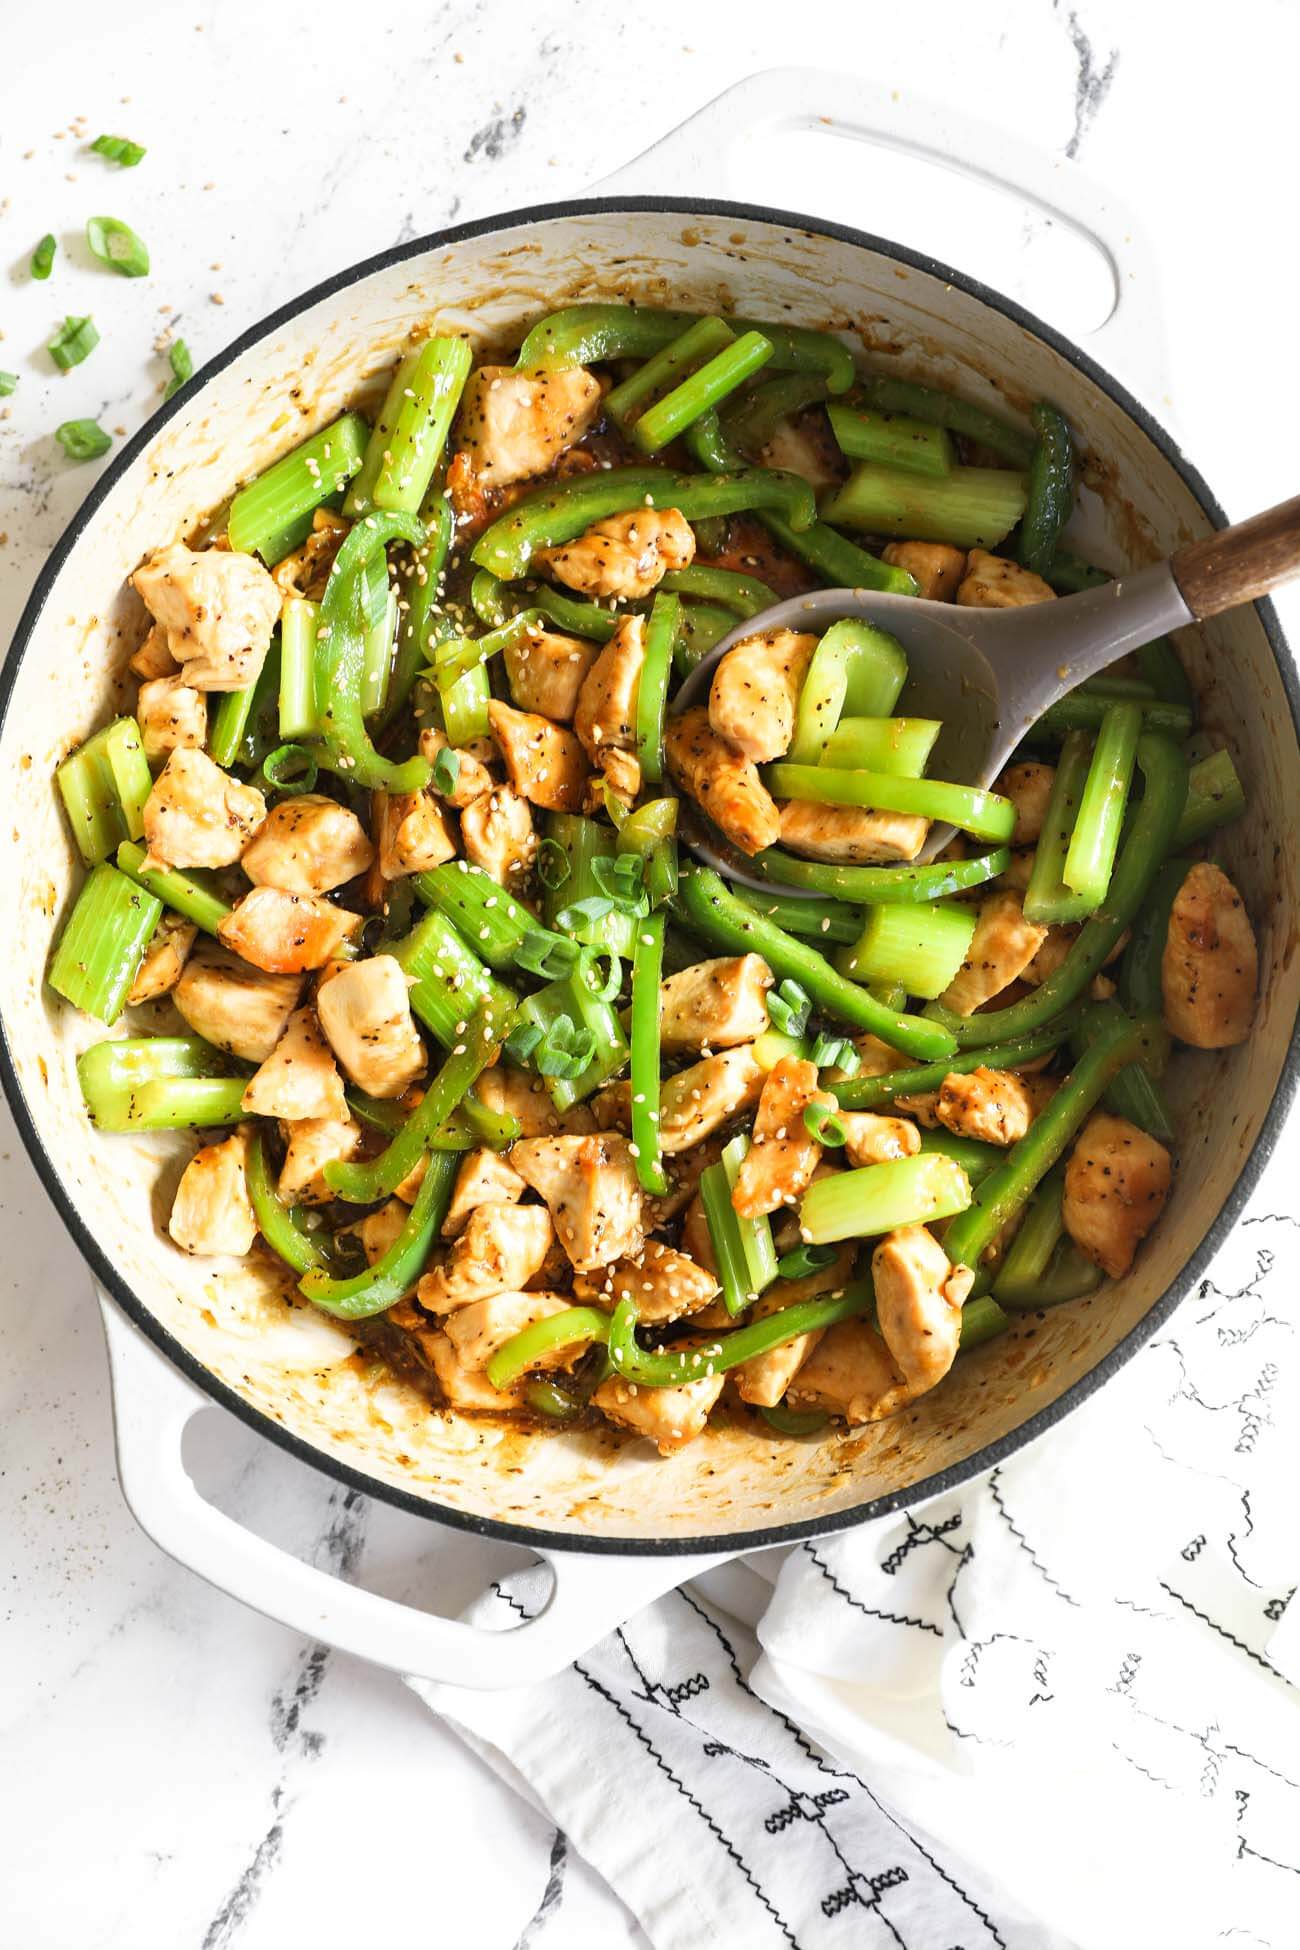 Black pepper chicken stir fry with celery and green bell pepper in a pan with sauce and a spoon scooping in